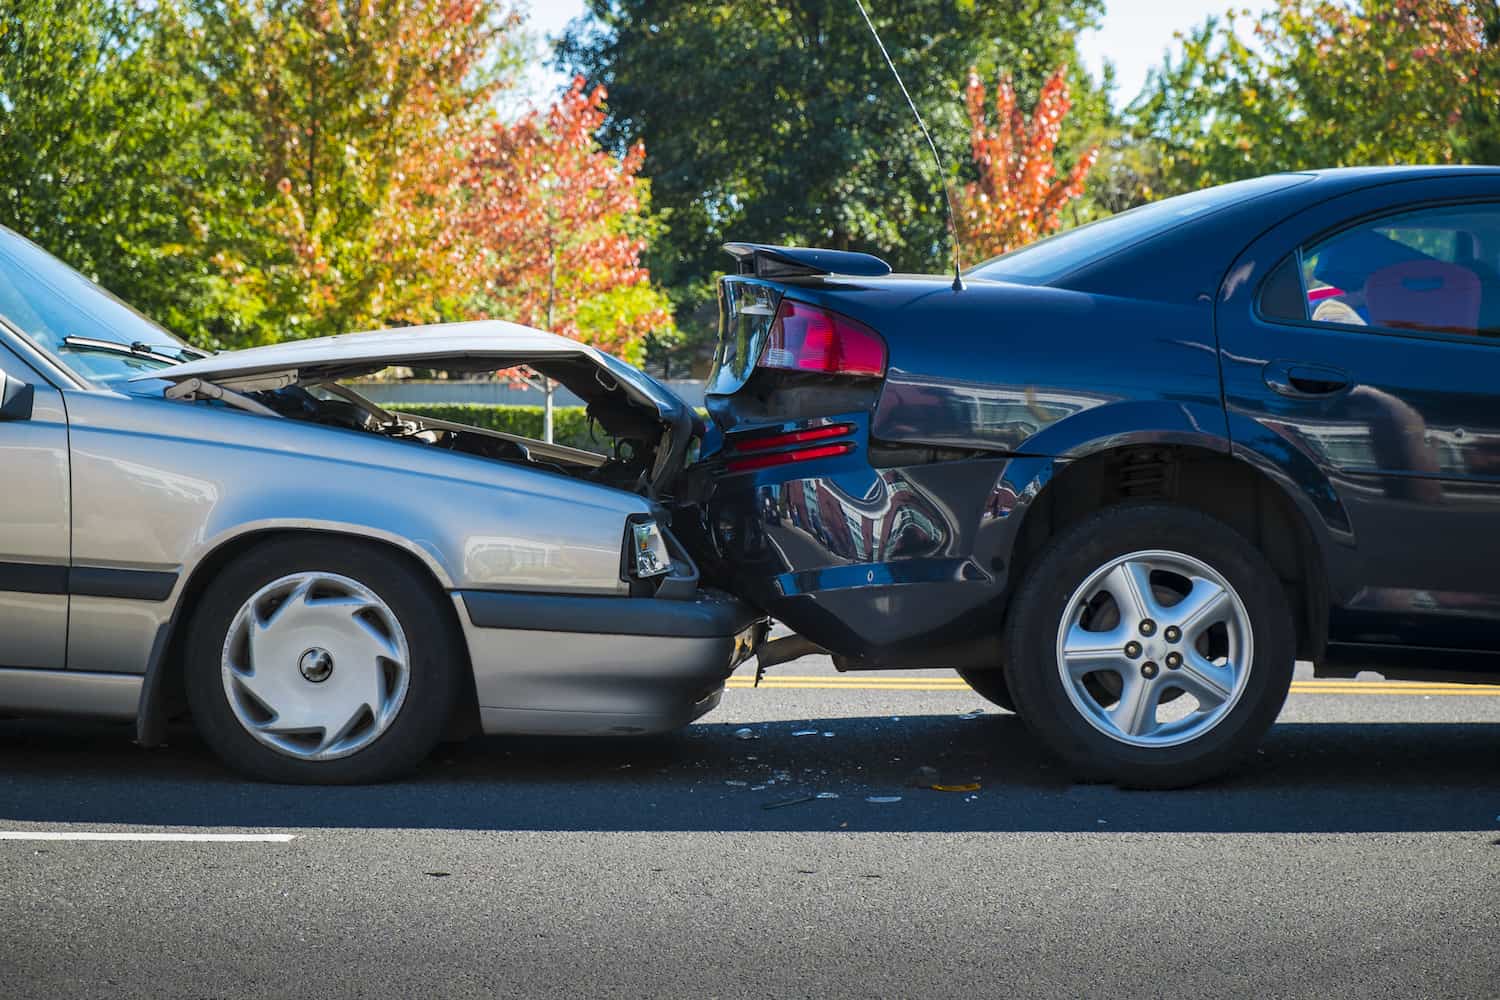 The Risks of Tailgating: Following Too Close